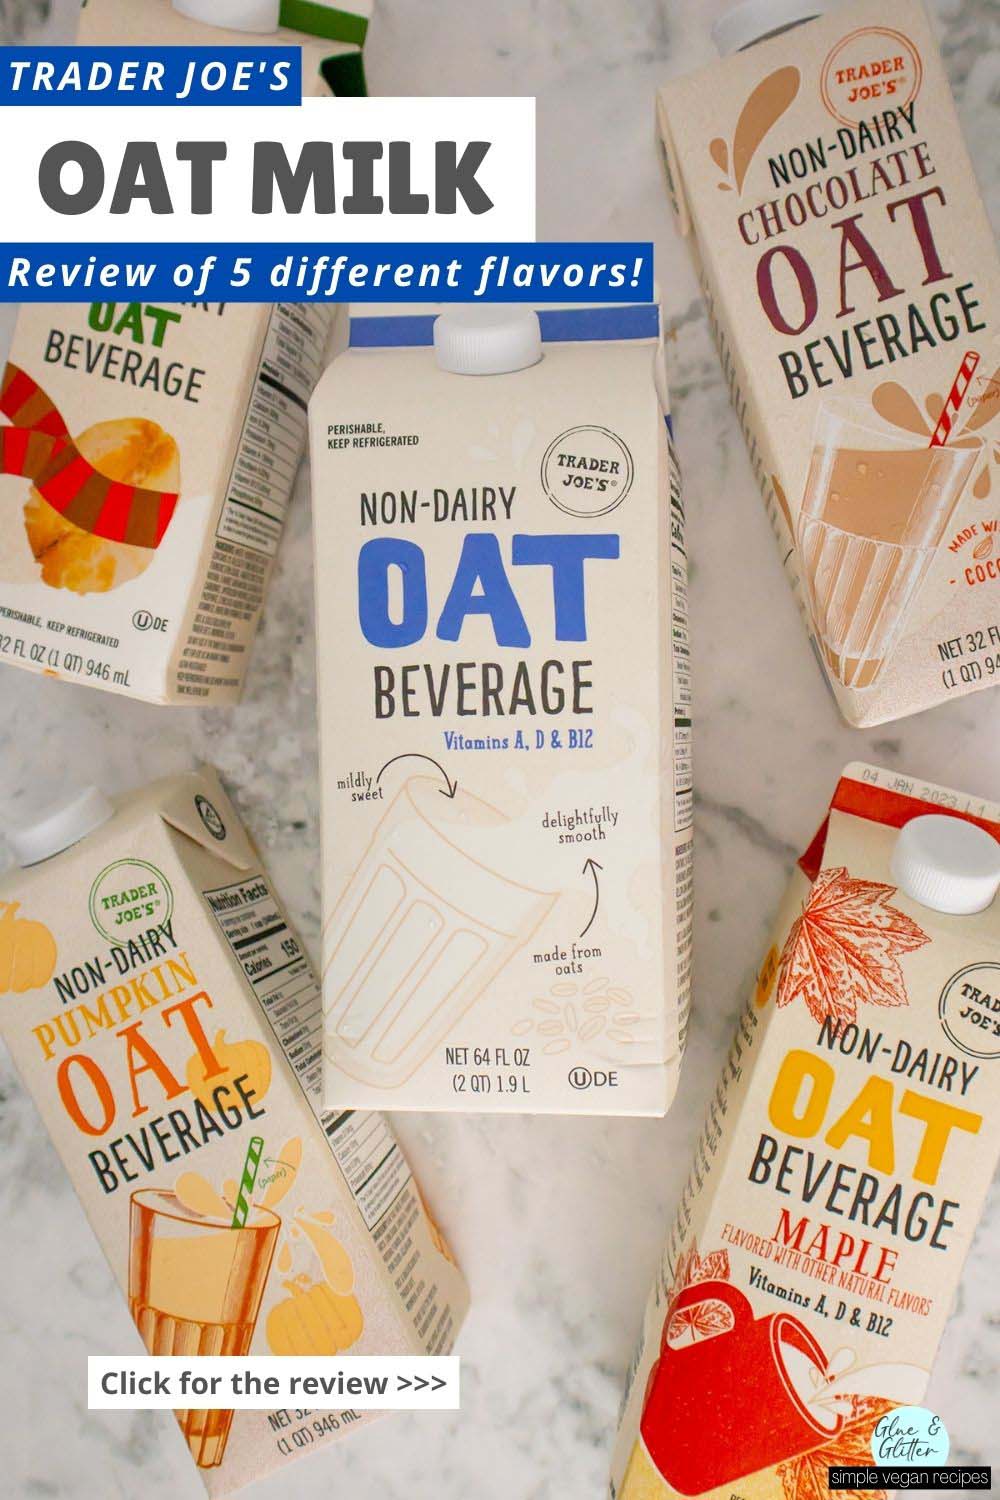 Trader Joe's Oat milk carton surrounded by their oat nog, maple beverage, chocolate, and pumpkin varieties, text overlay